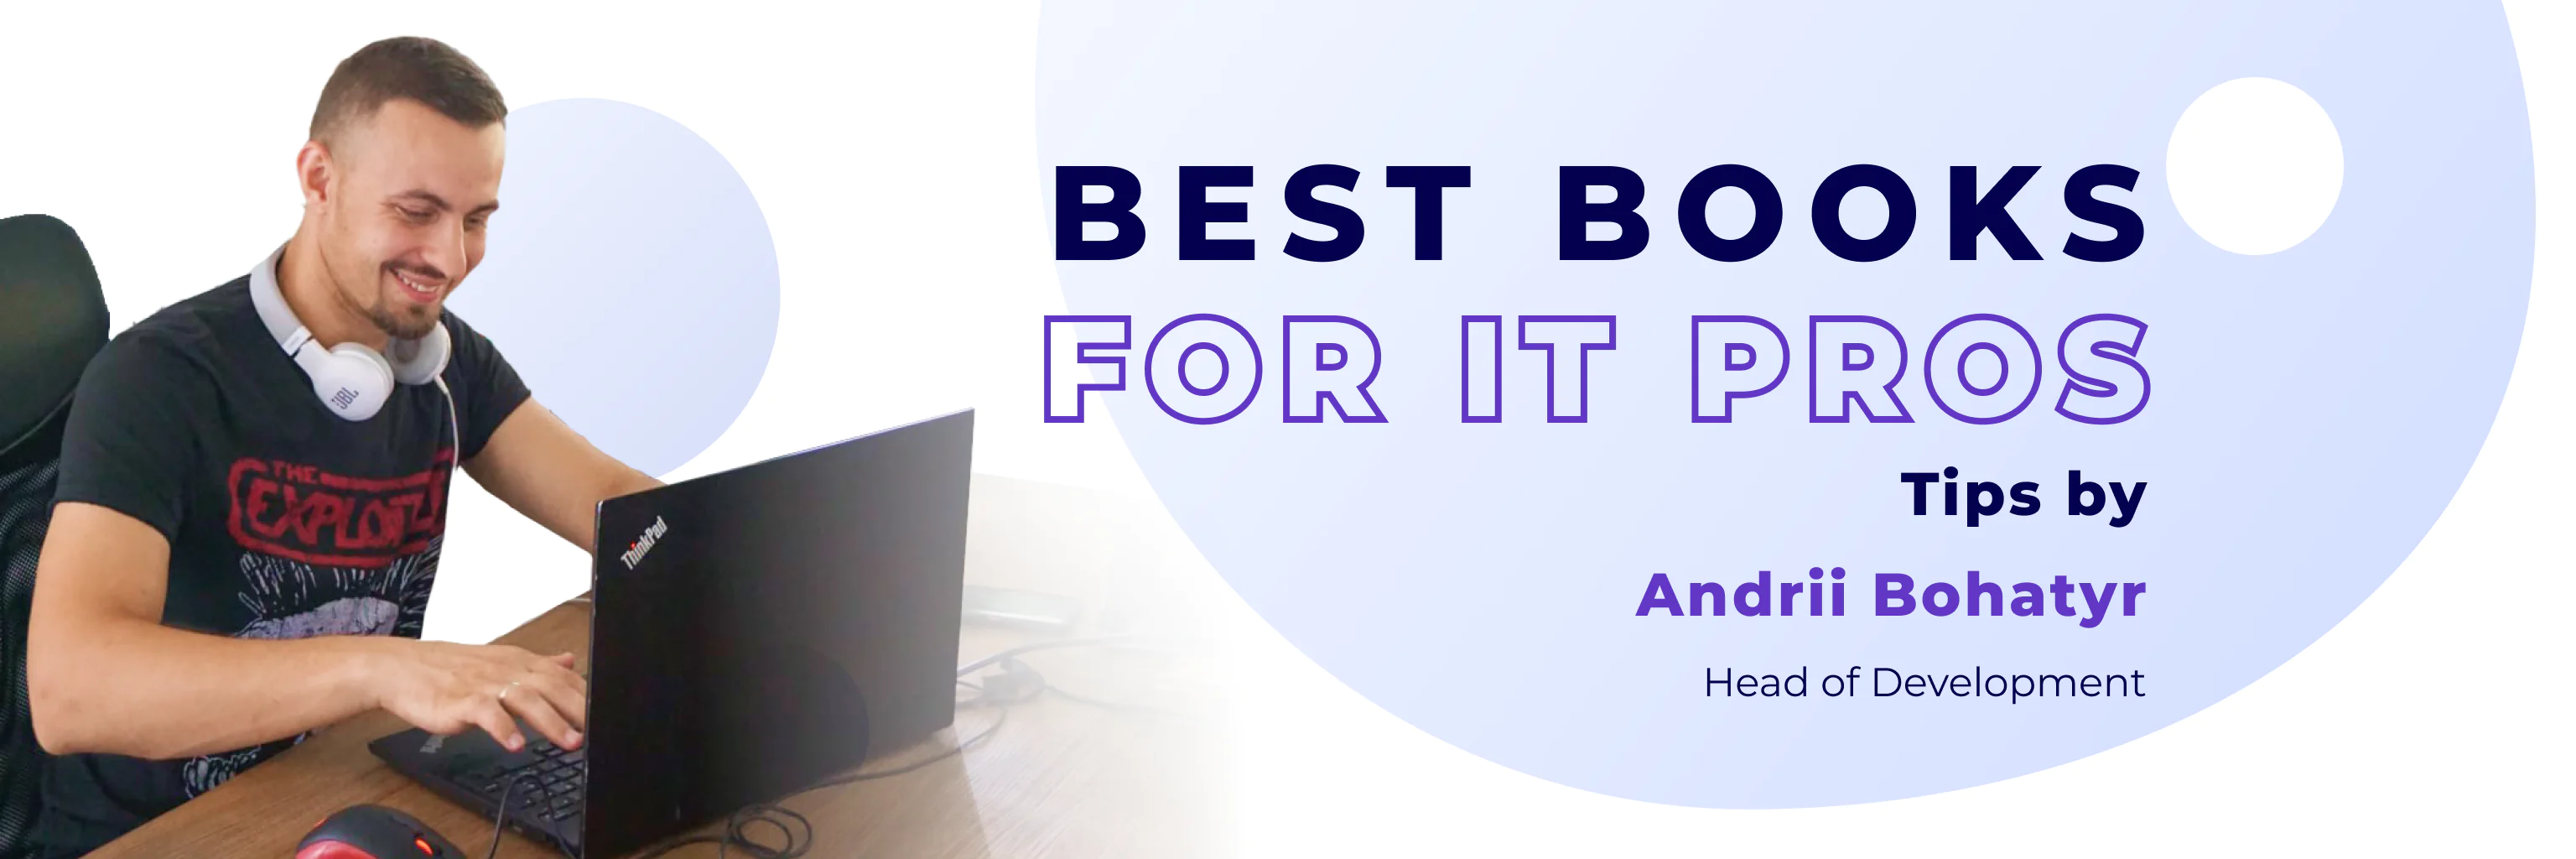 Best Books for Programmers and Other IT Pros by Andrii Bohatyr